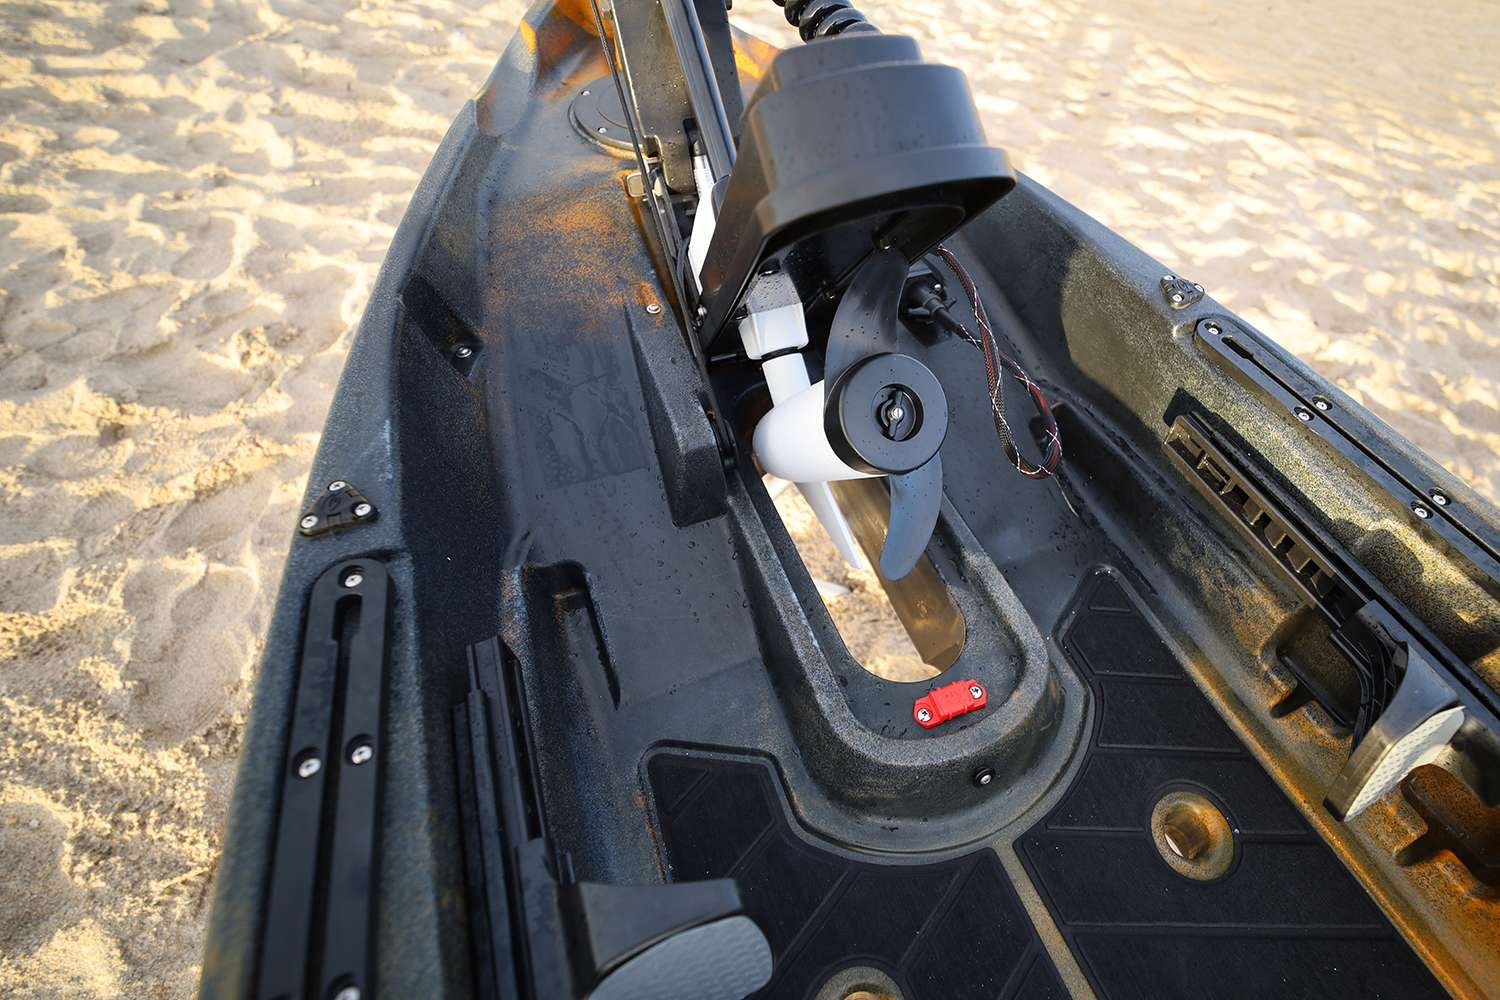 Here's a look at the Minn Kota 45-pound thrust trolling motor, which is remote drive and offers the now-famous Spot Lock.